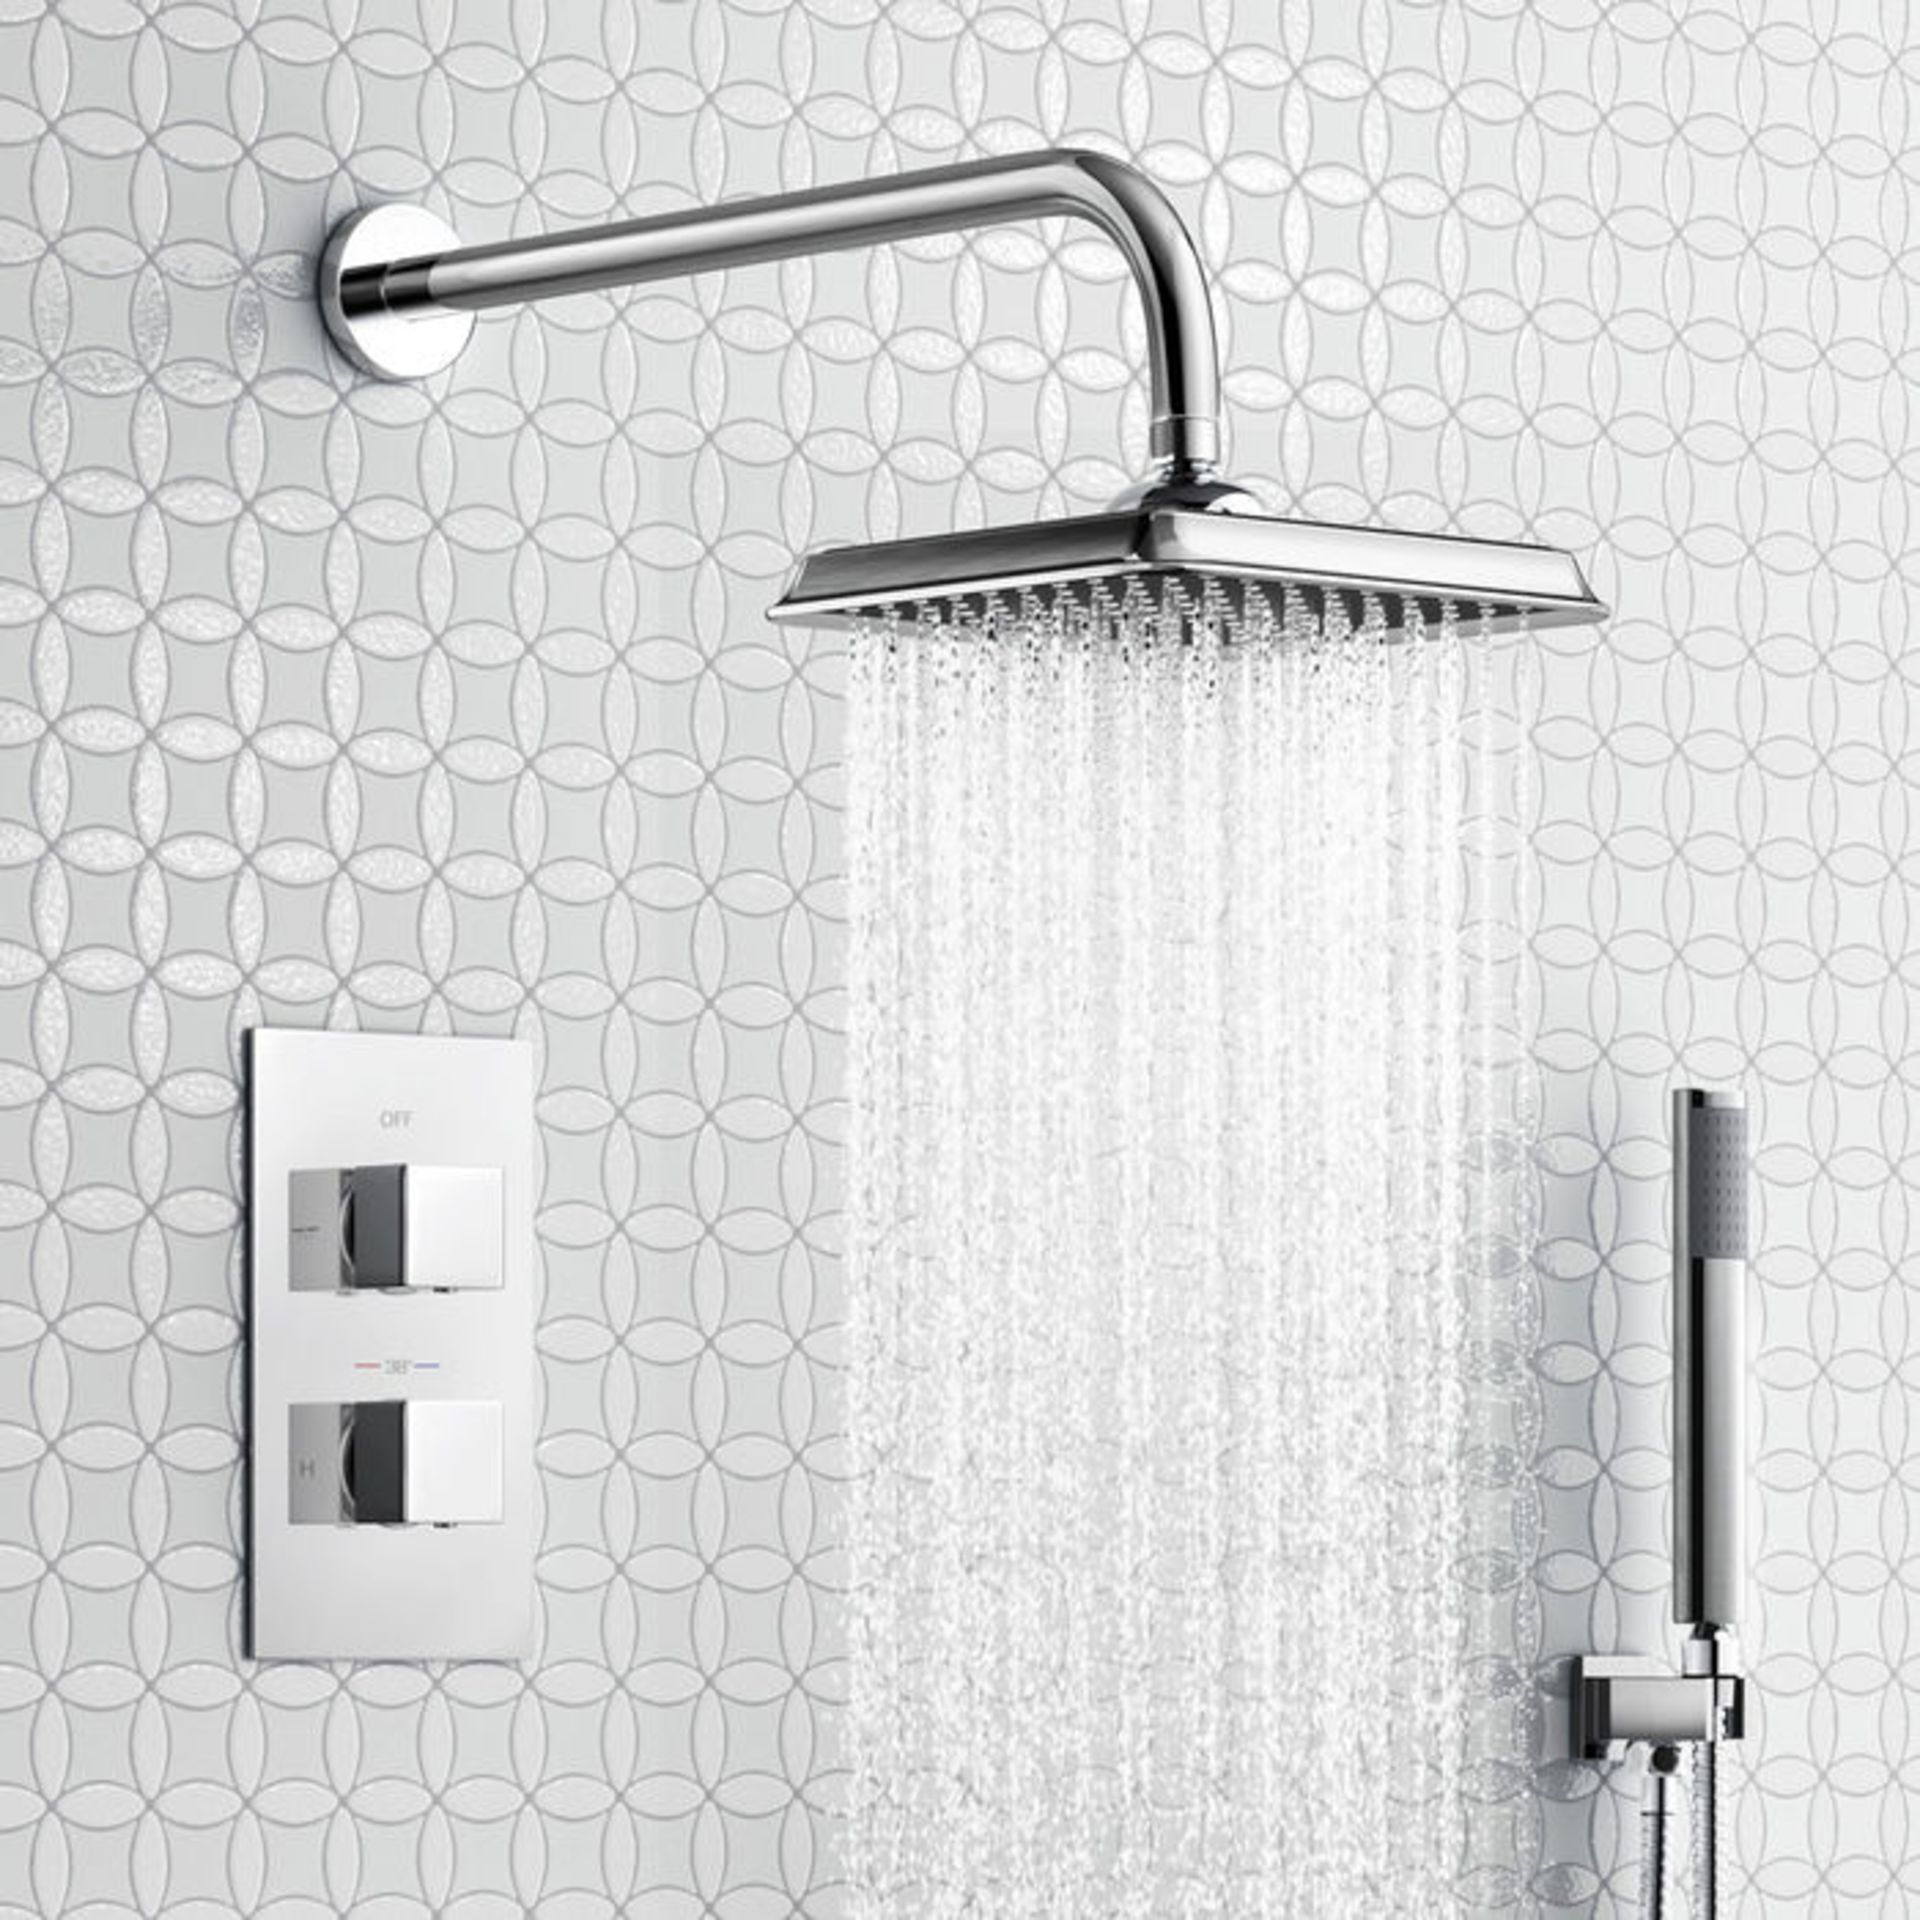 (S12)Square Concealed Thermostatic Mixer Show Kit & Medium Head . Enjoy the minimalistic aesthetic